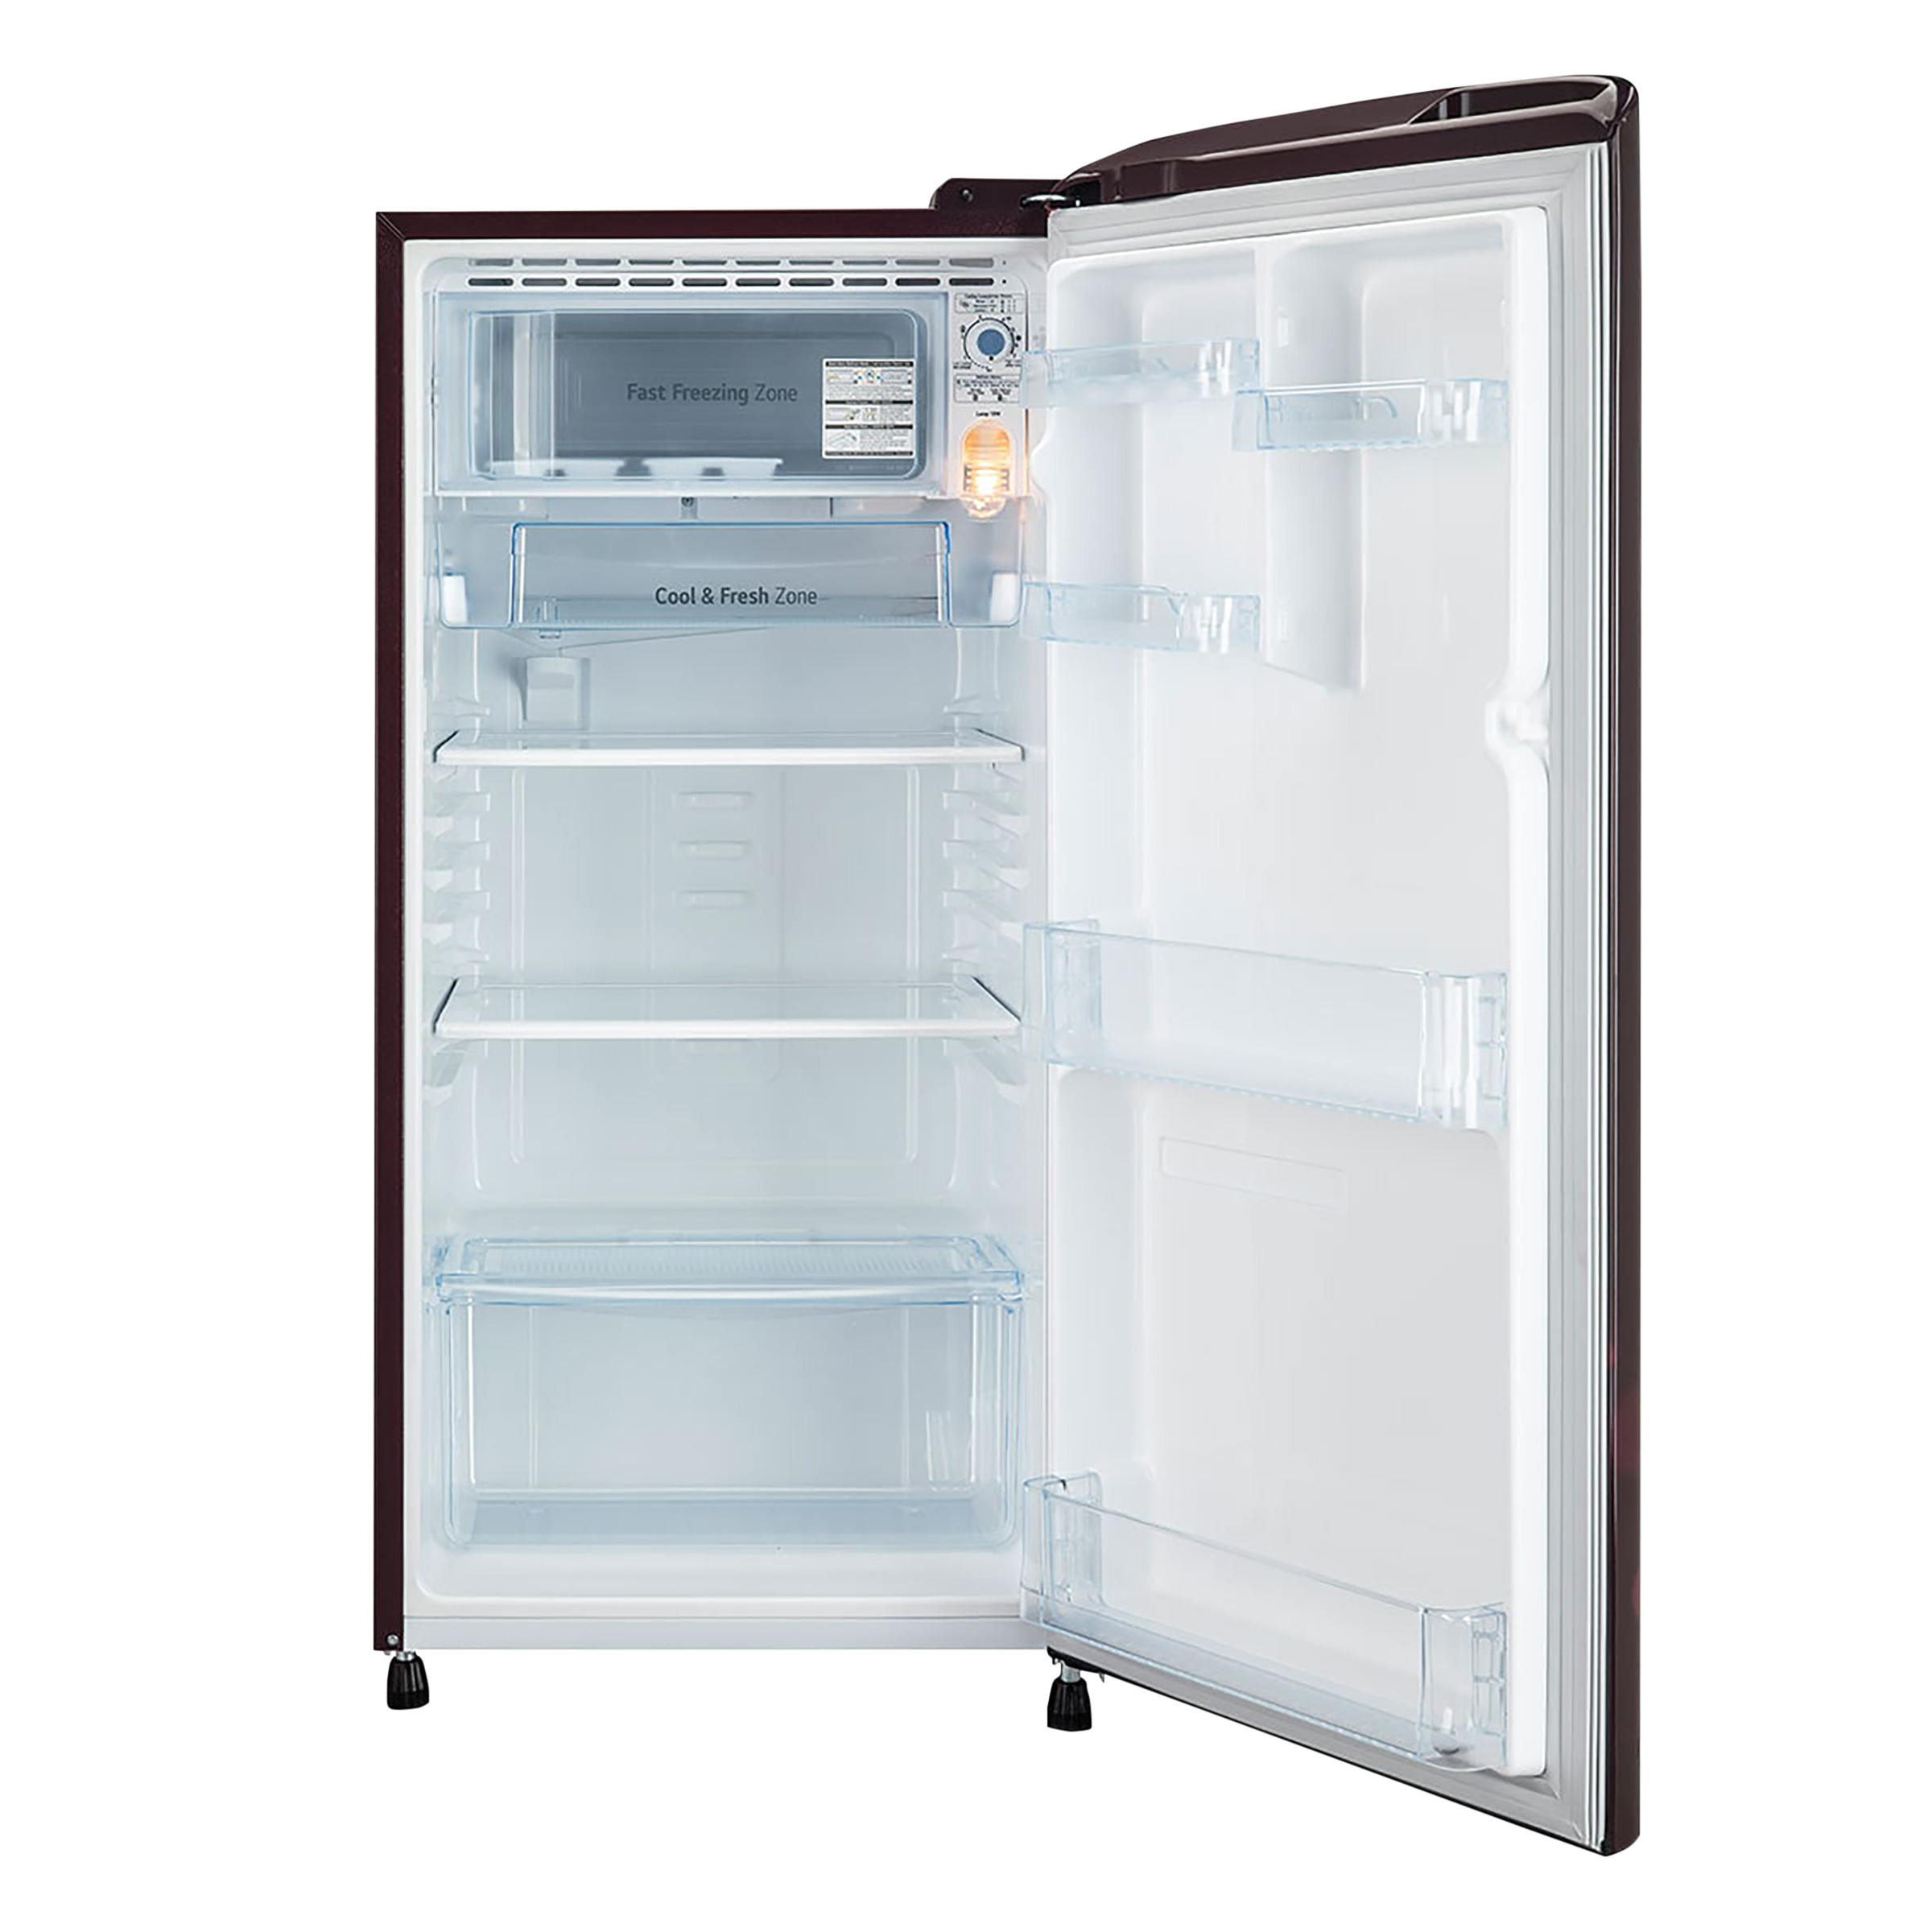 buy-lg-190-litres-5-star-direct-cool-single-door-refrigerator-with